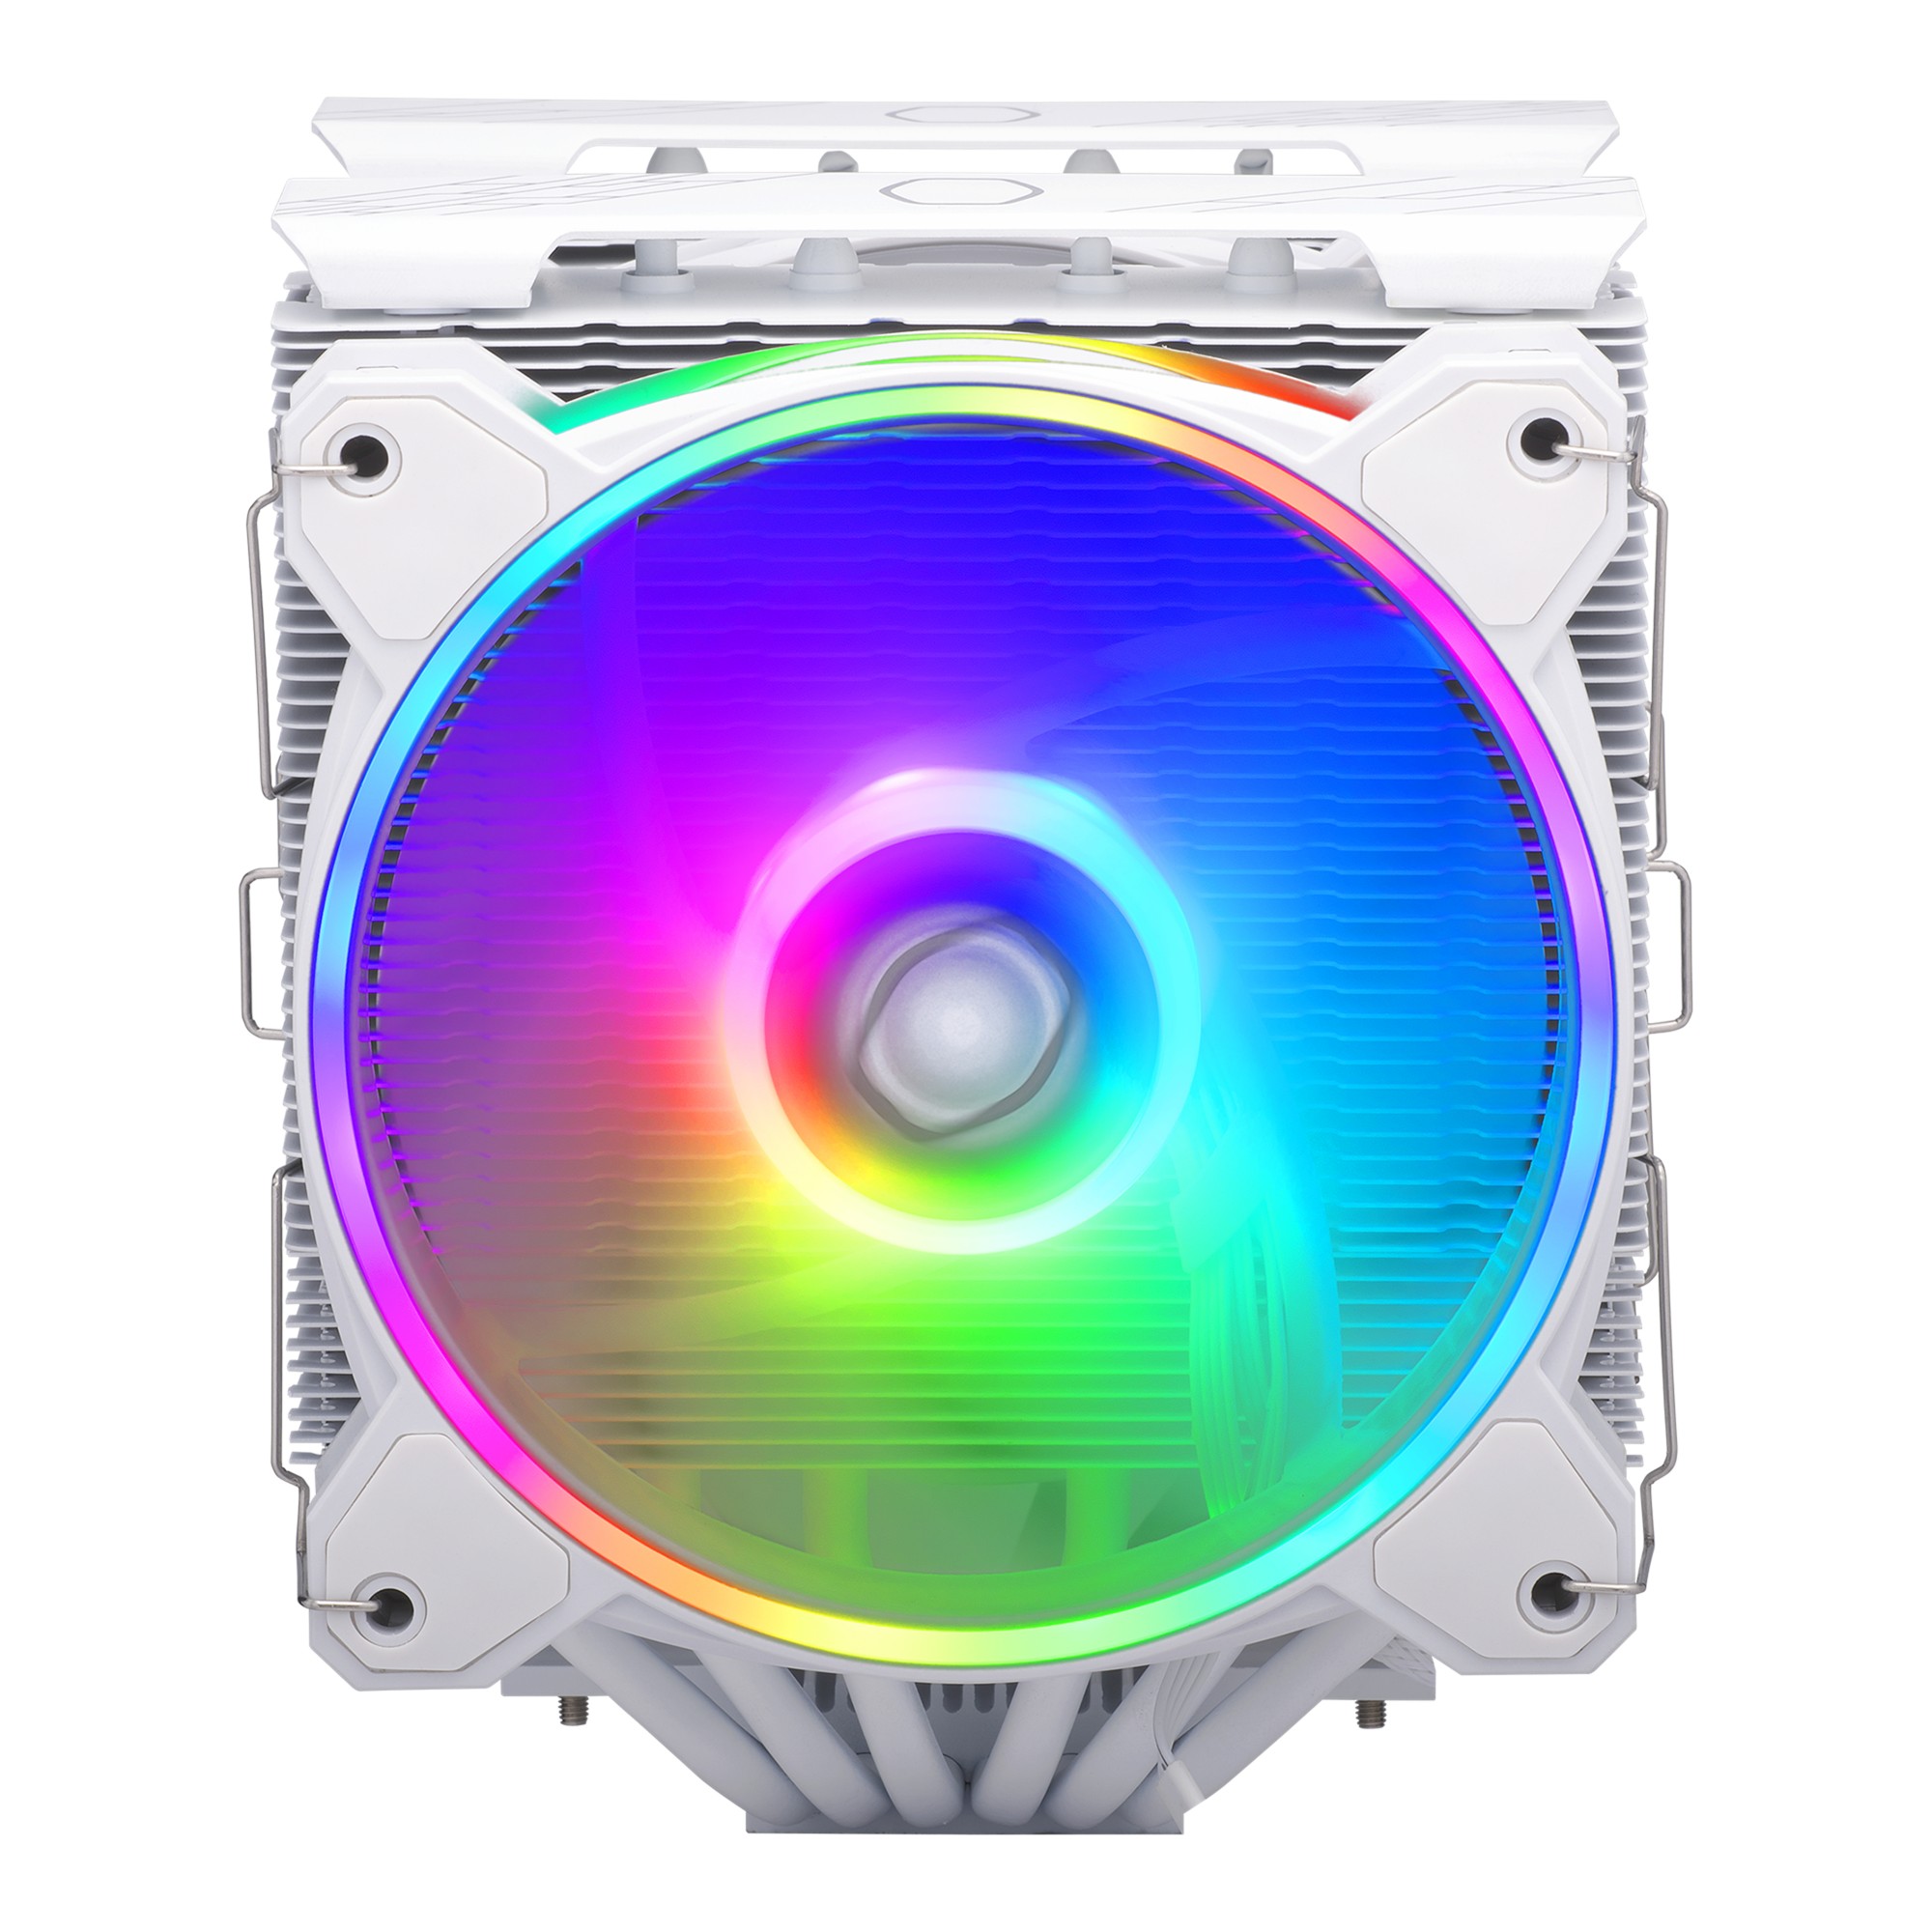 RR-D6WW-20PA-R1 COOLER MASTER Hyper 622 Halo Dual-Tower CPU Cooler, White, 6 Heatpipes, 2x 120mm RGB Fans, Intel/AMD